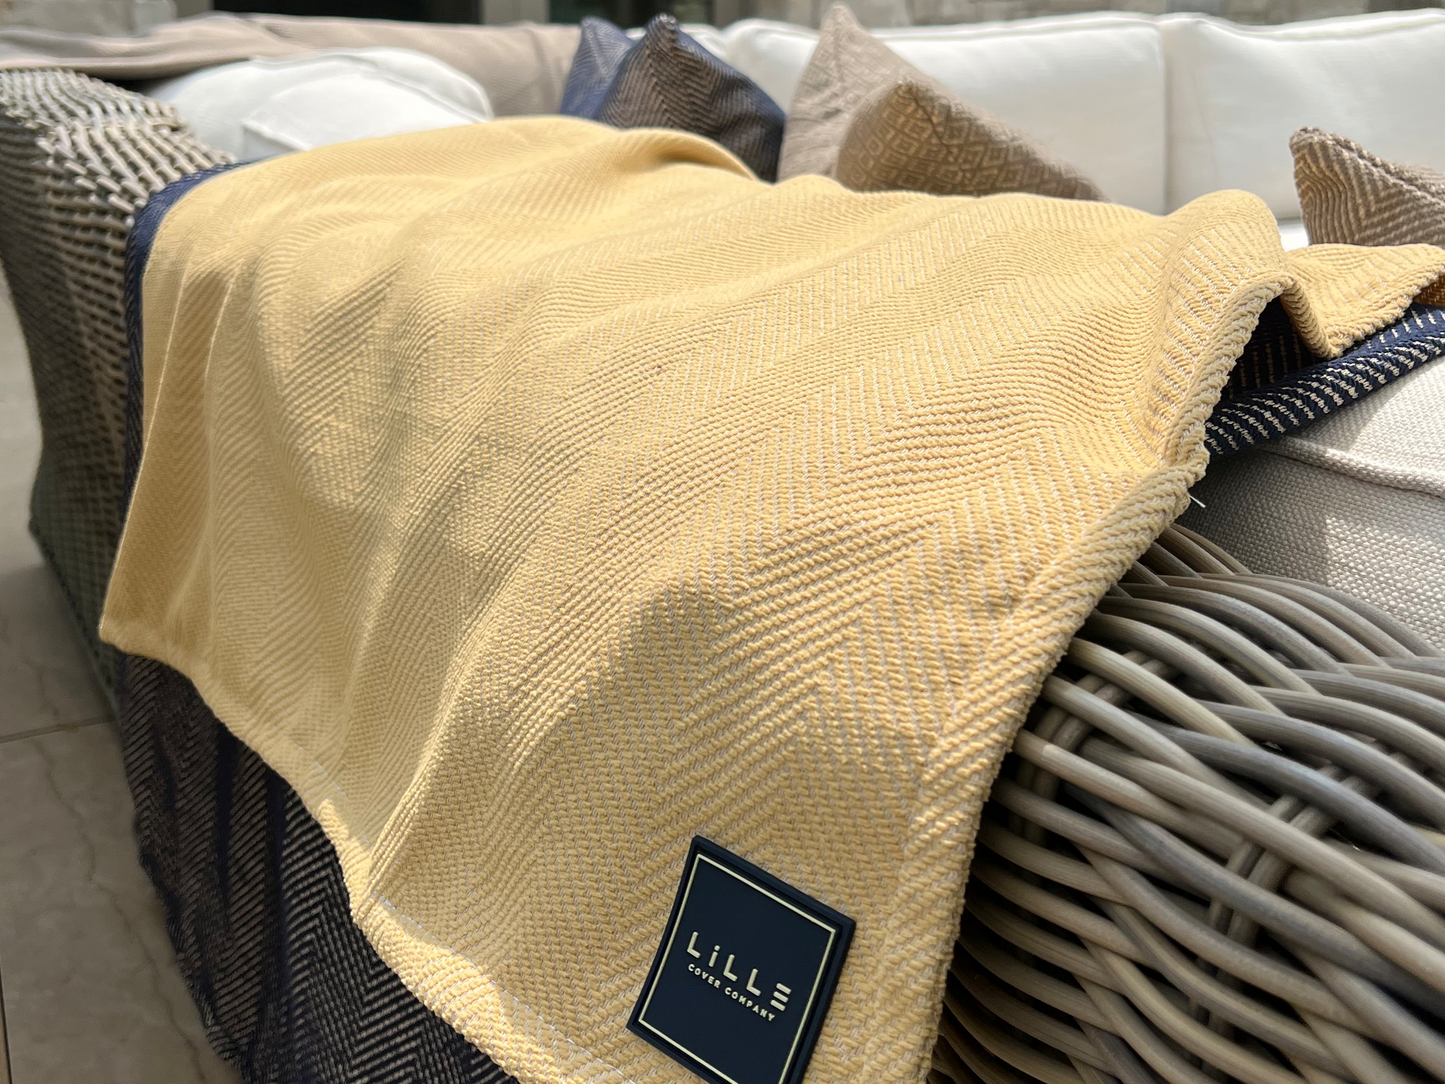 Sausalito Water Resistant Indoor/Outdoor Throws and Blankets